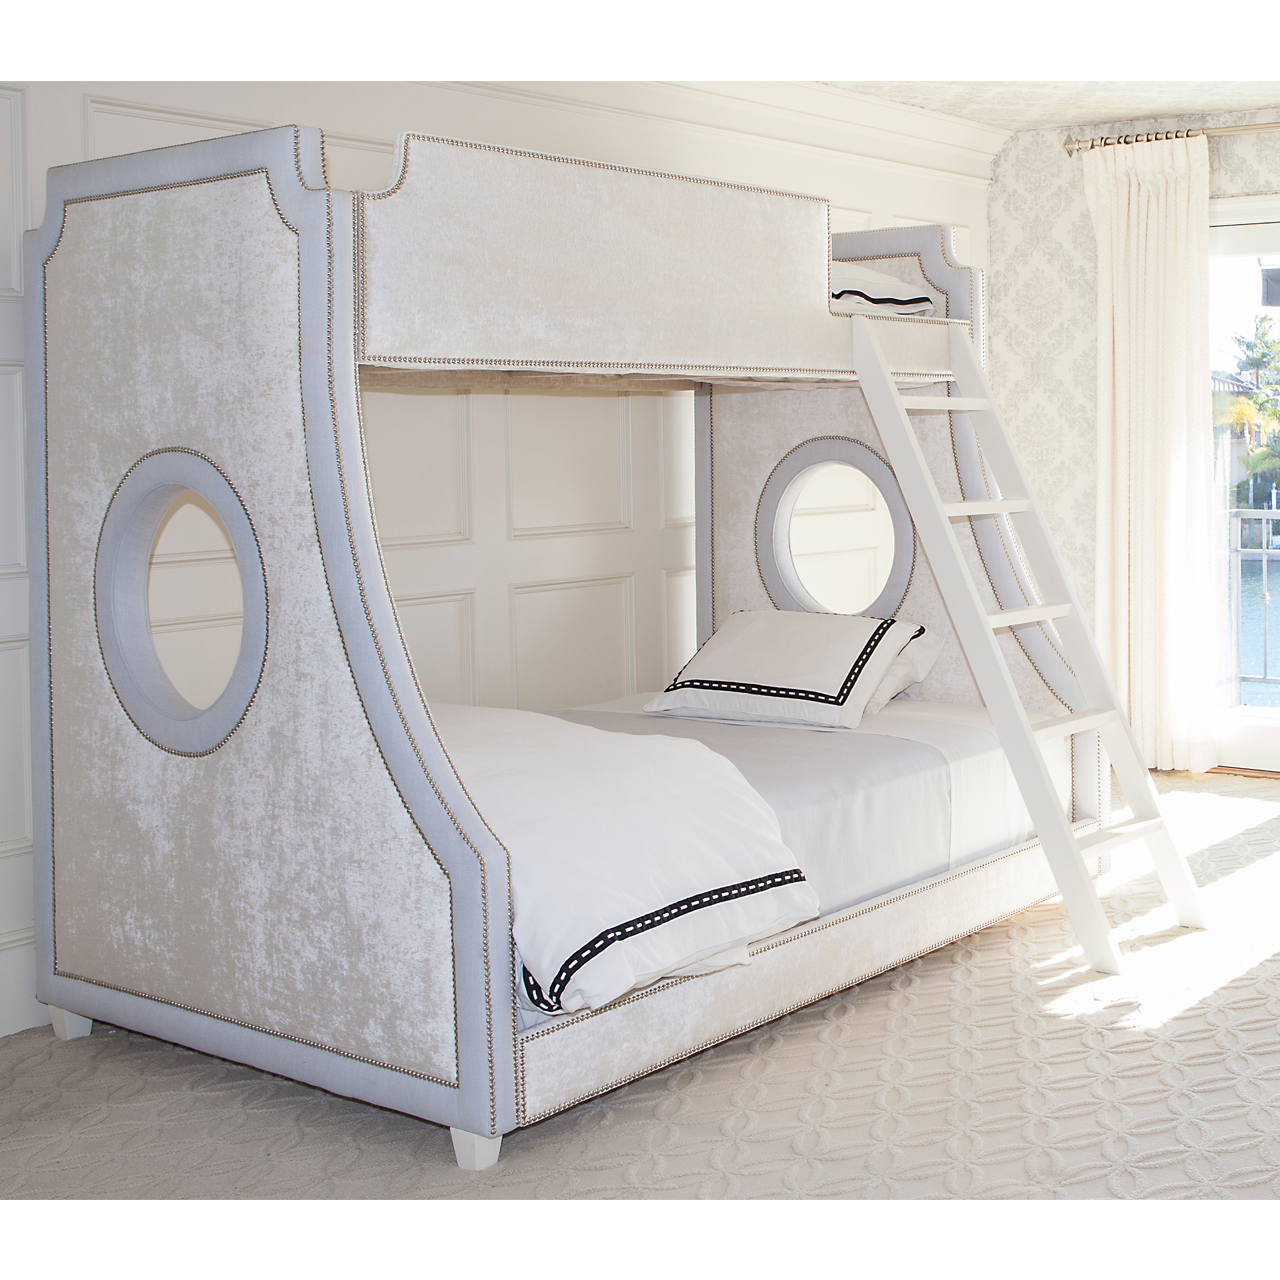 AFK Furniture Luxury Baby Furniture High End Childrens